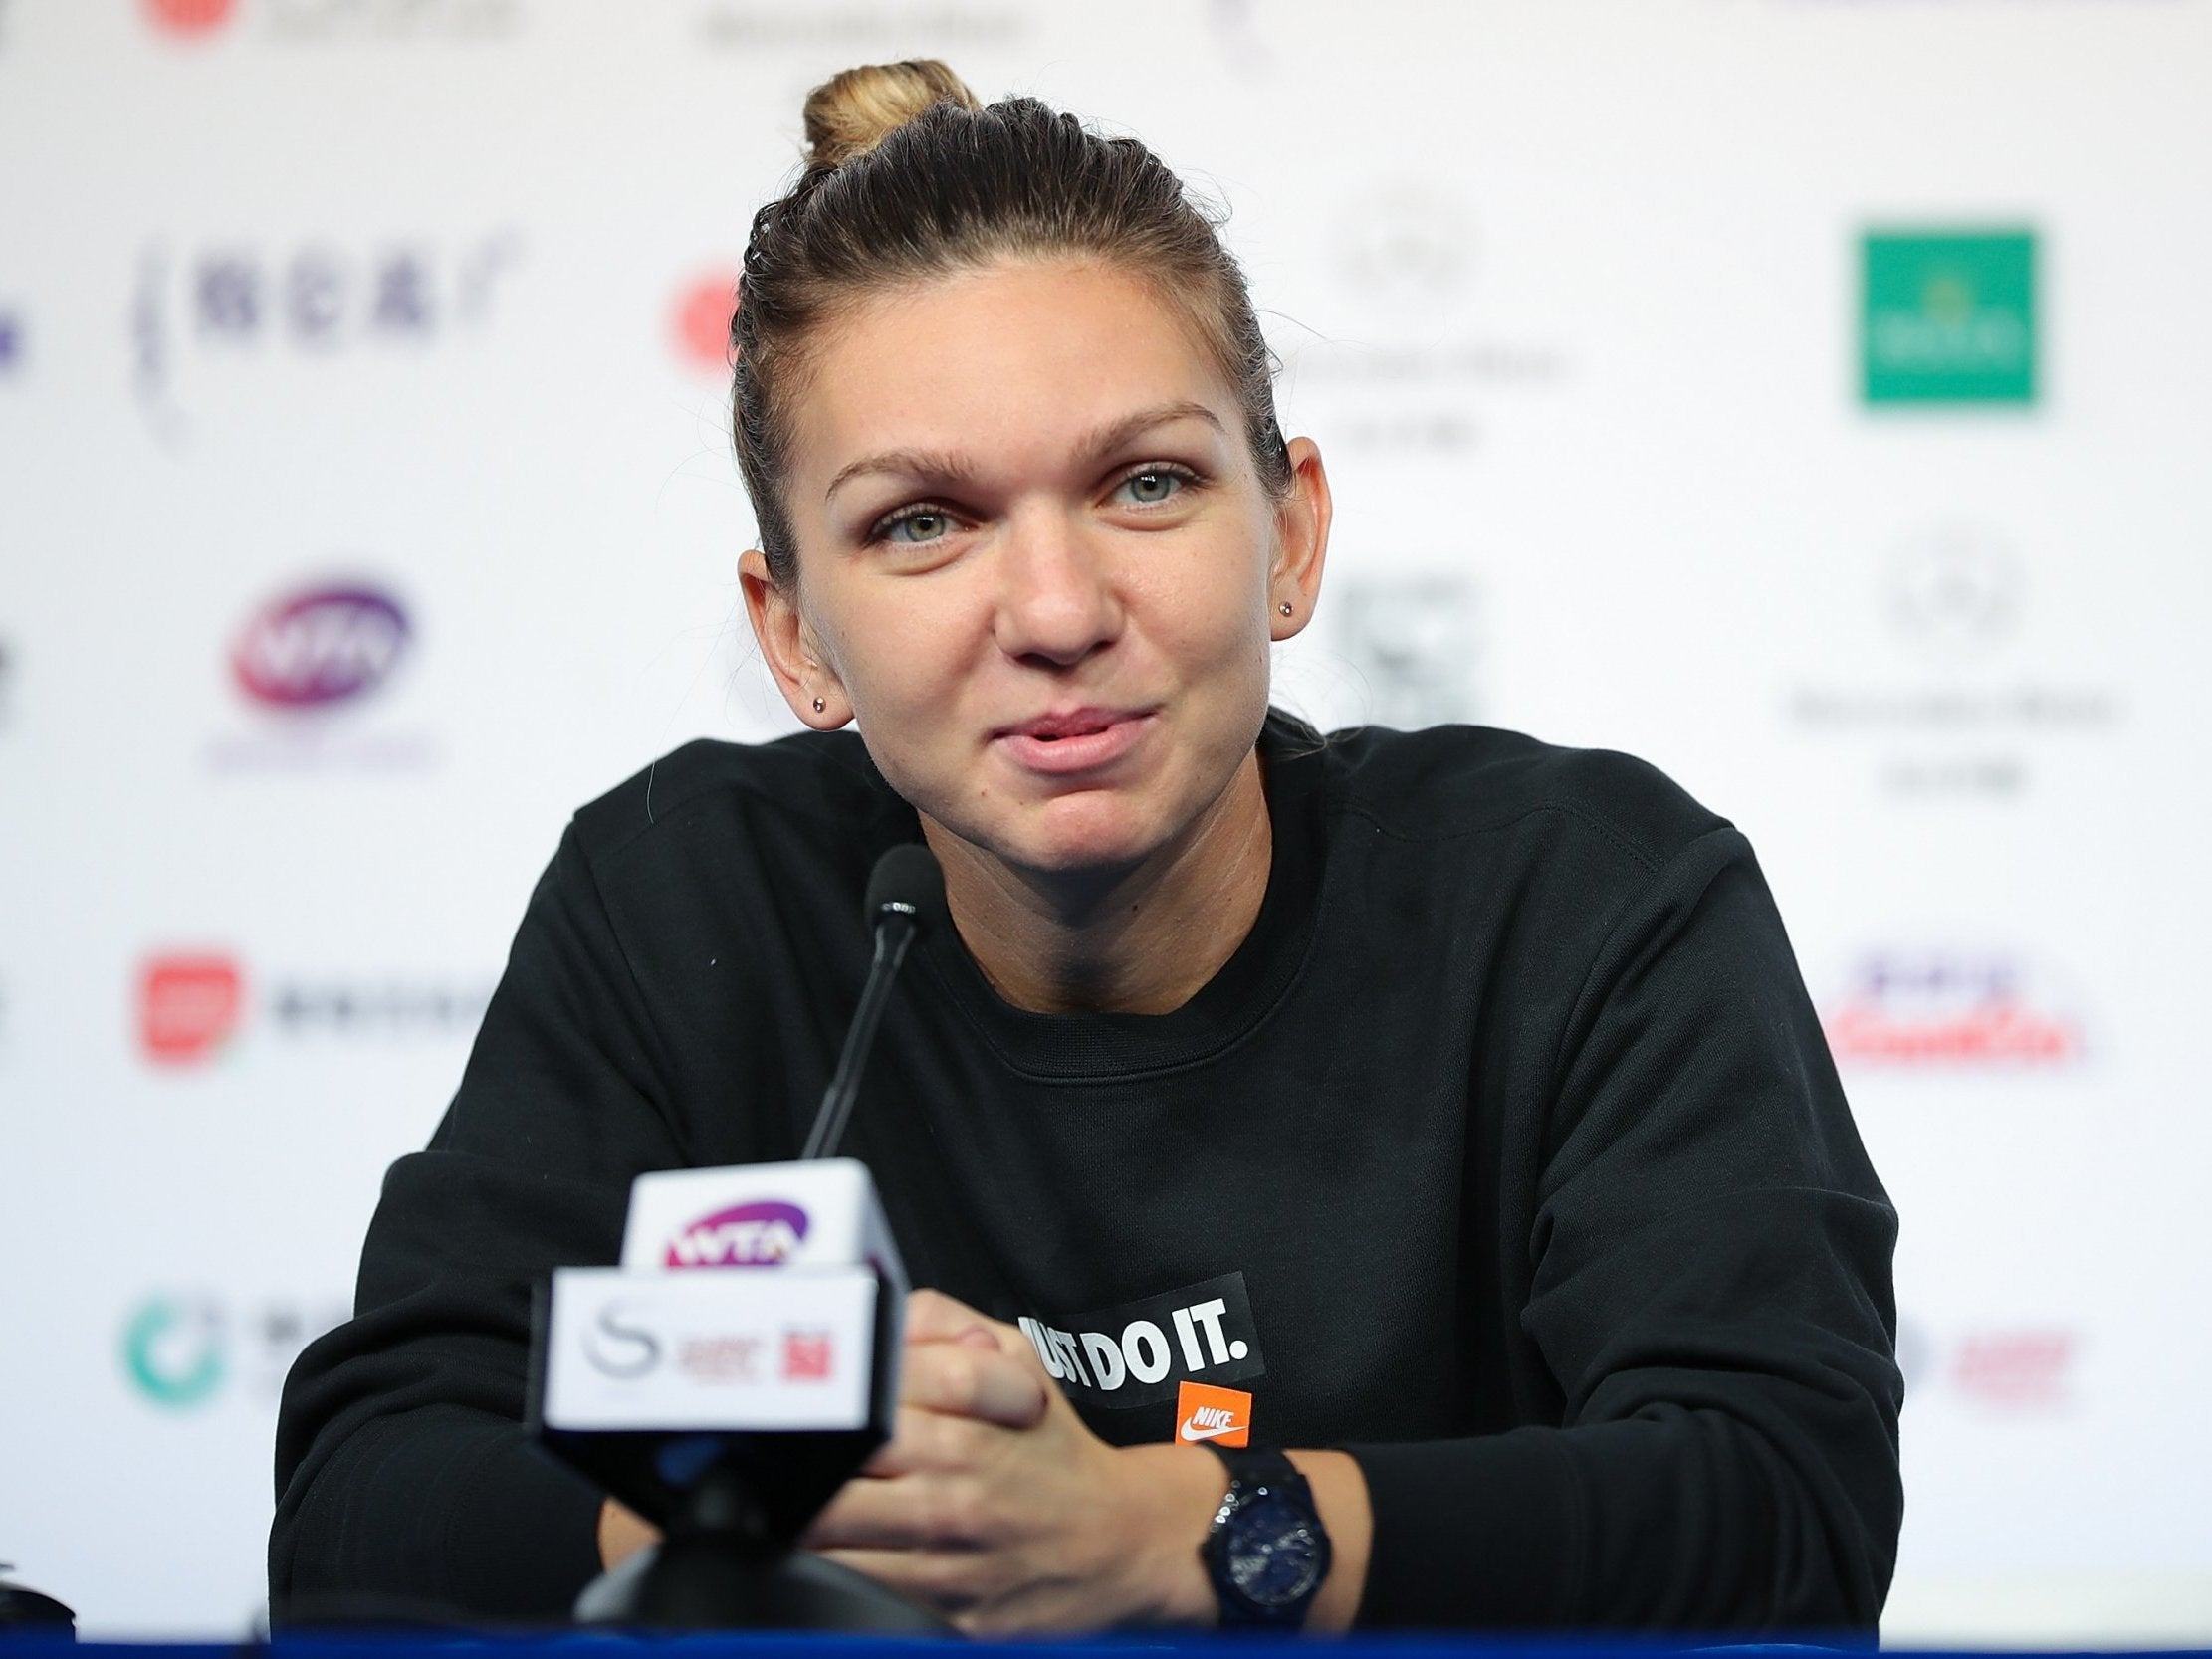 Simona Halep will end the year as world No 1